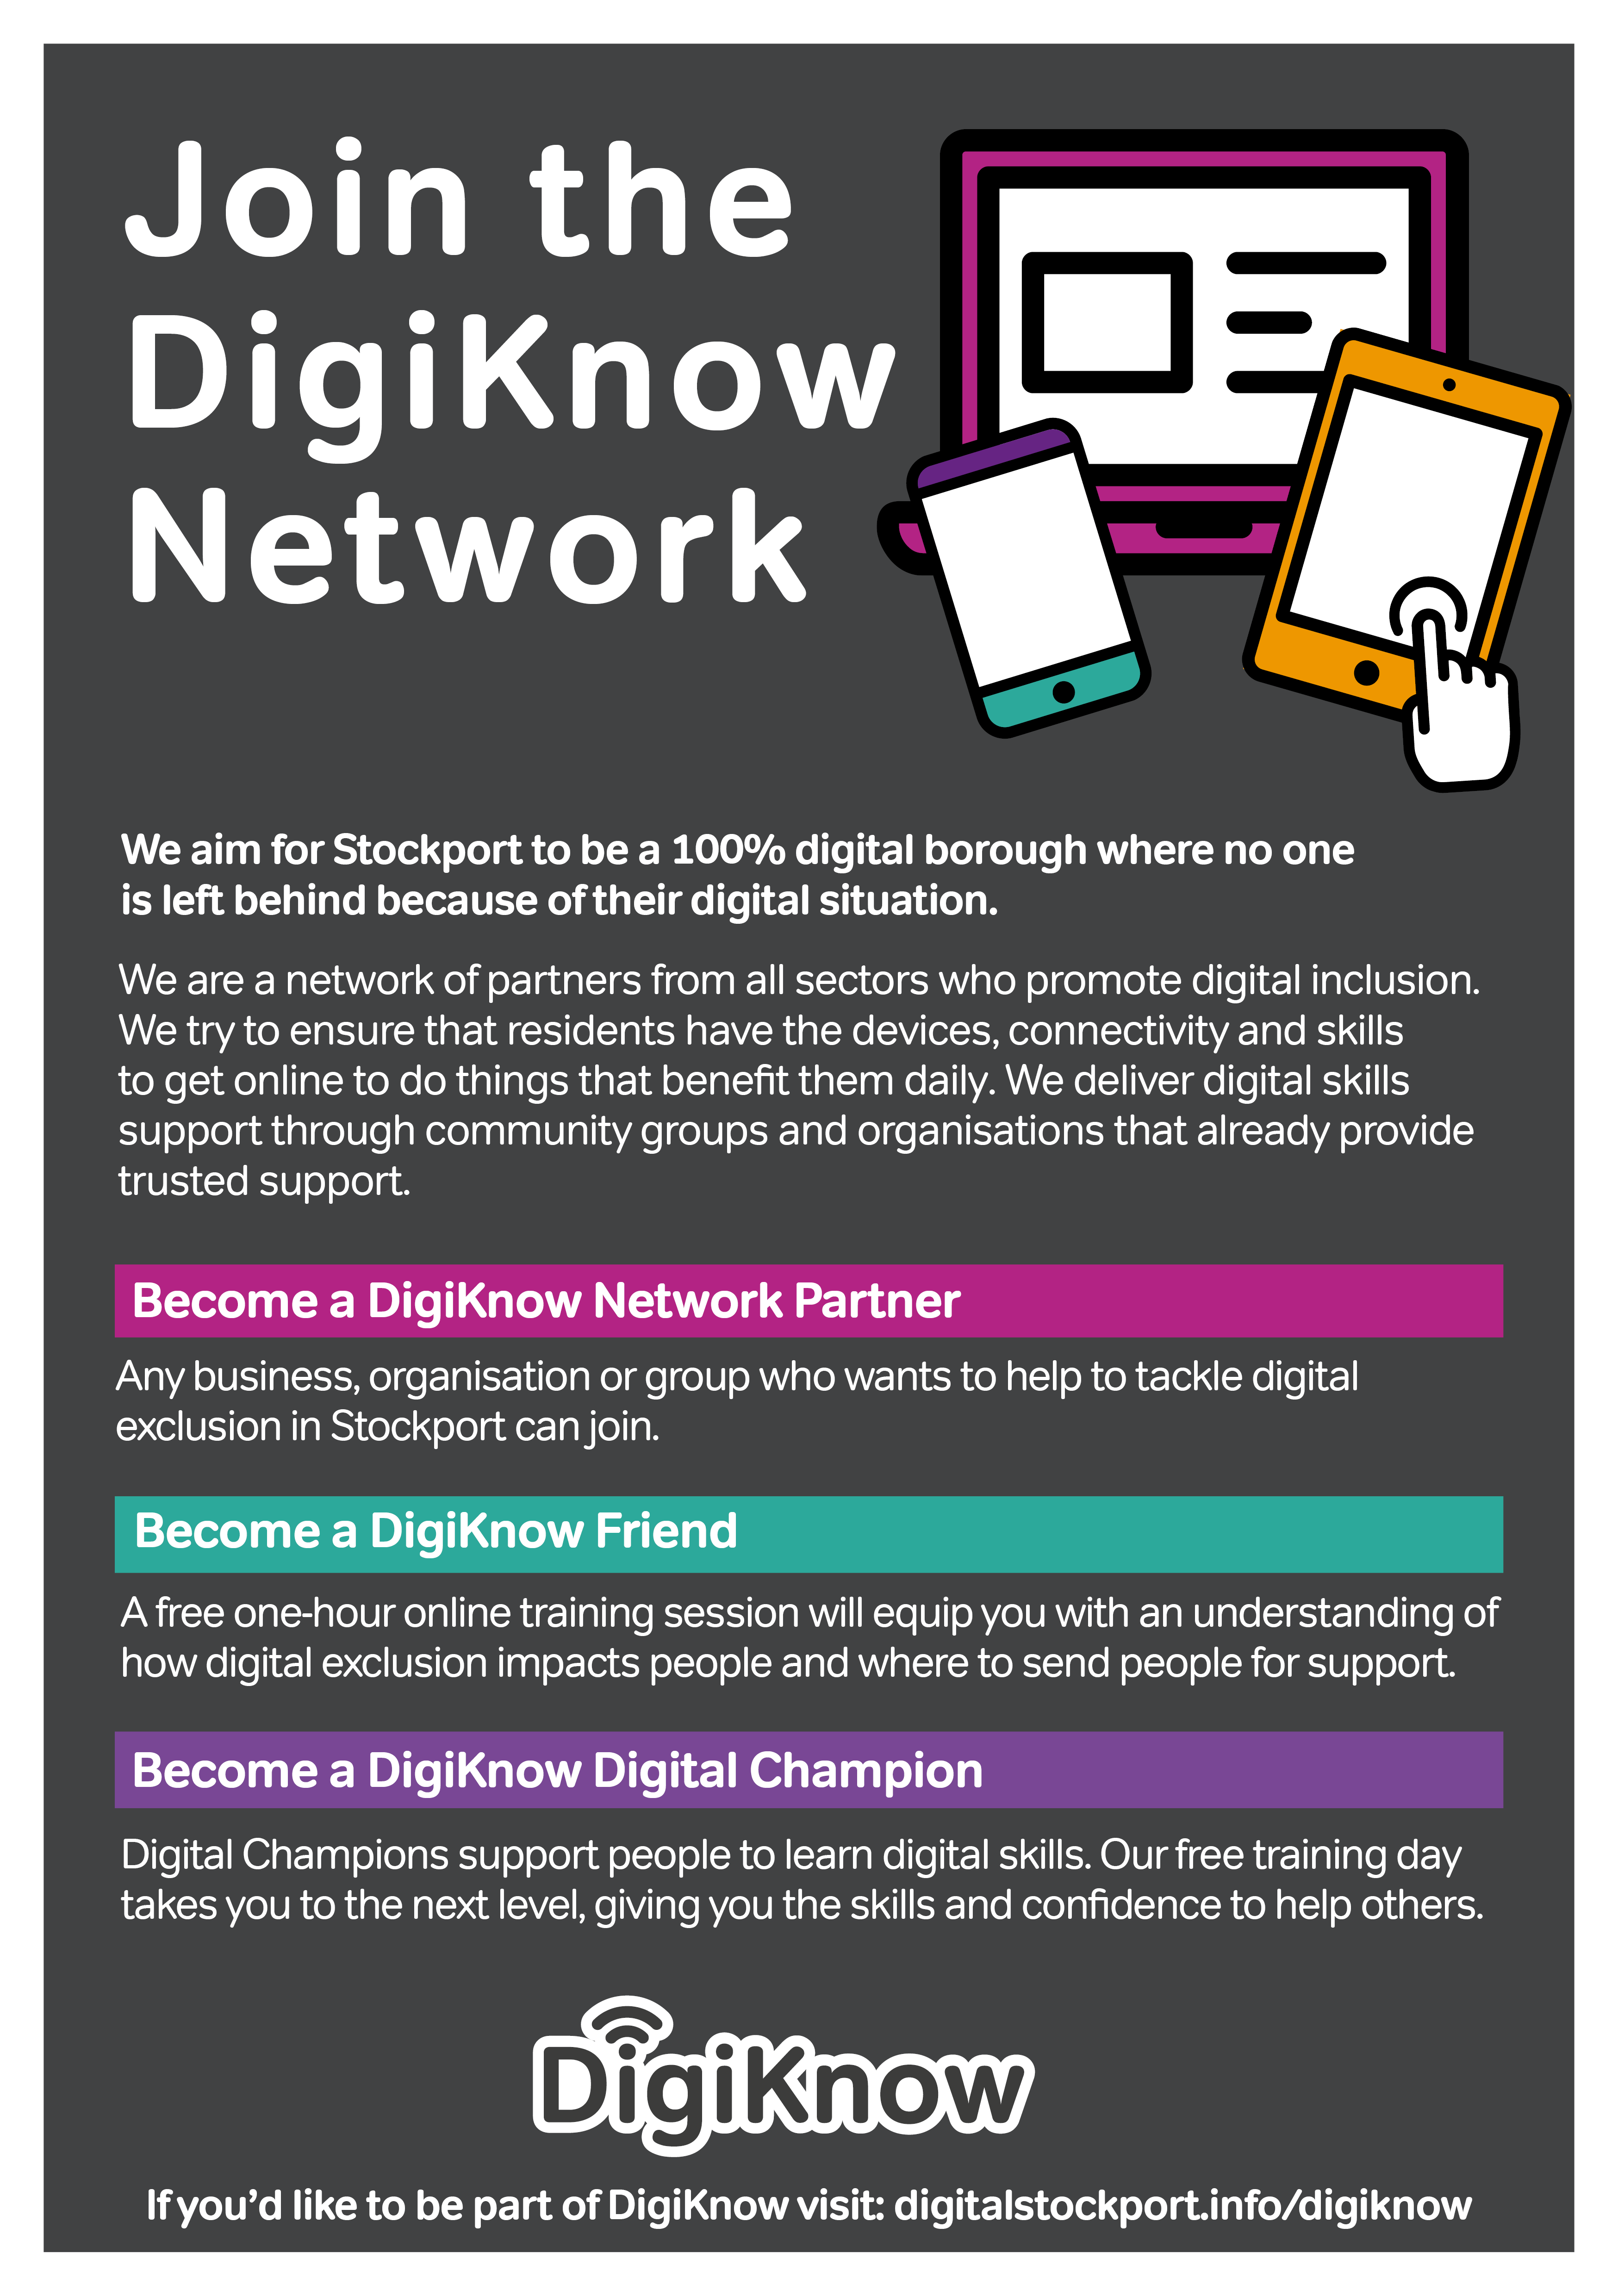 Join the DigiKnow Network flyer